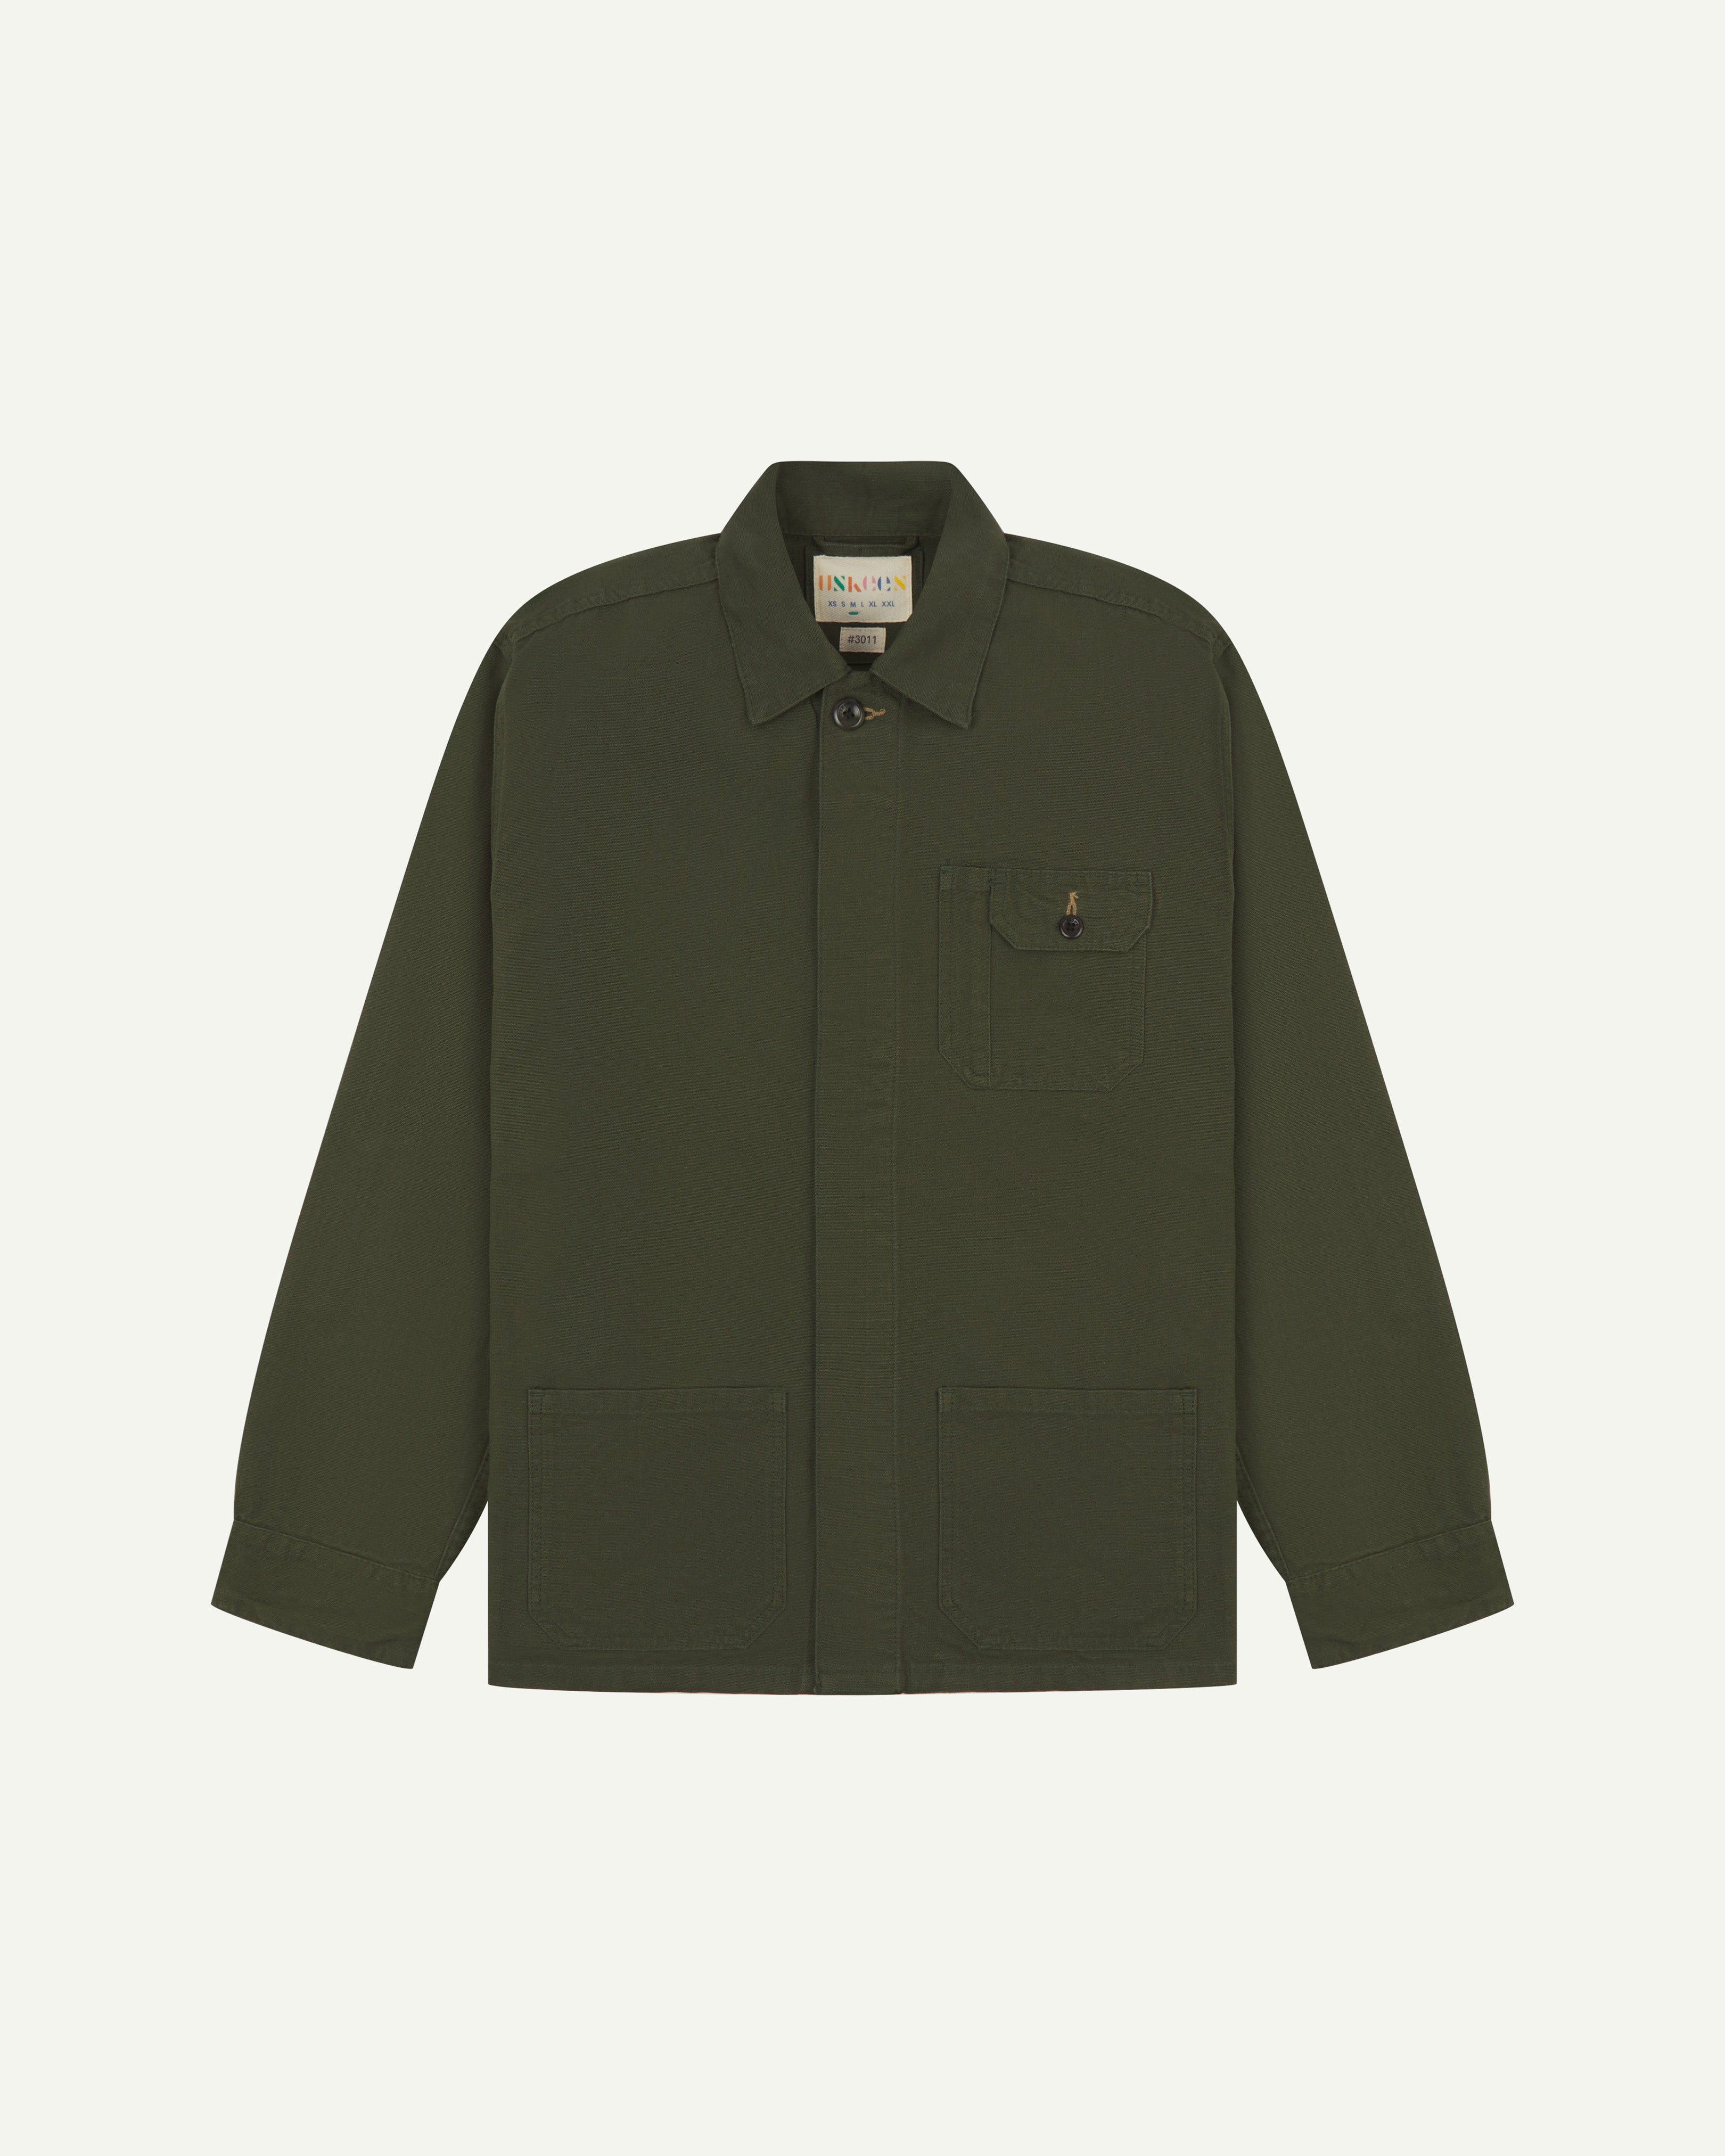 Full-length front view of vine green #3011 overshirt by Uskees,  demonstrating simple, boxy silhouette and hidden buttons.